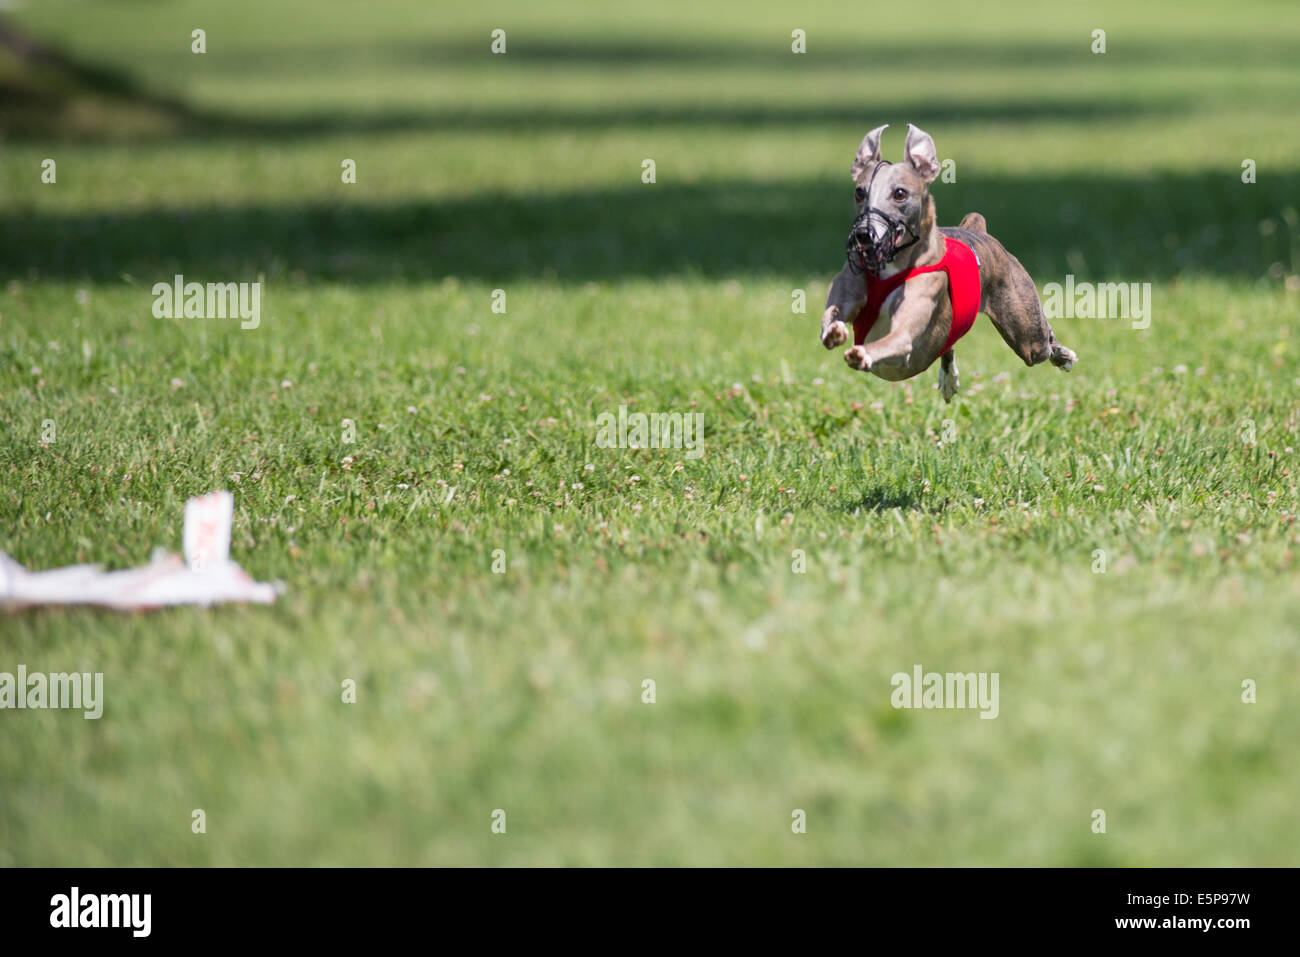 https://c8.alamy.com/comp/E5P97W/dog-chasing-the-lure-in-a-lure-course-competition-E5P97W.jpg